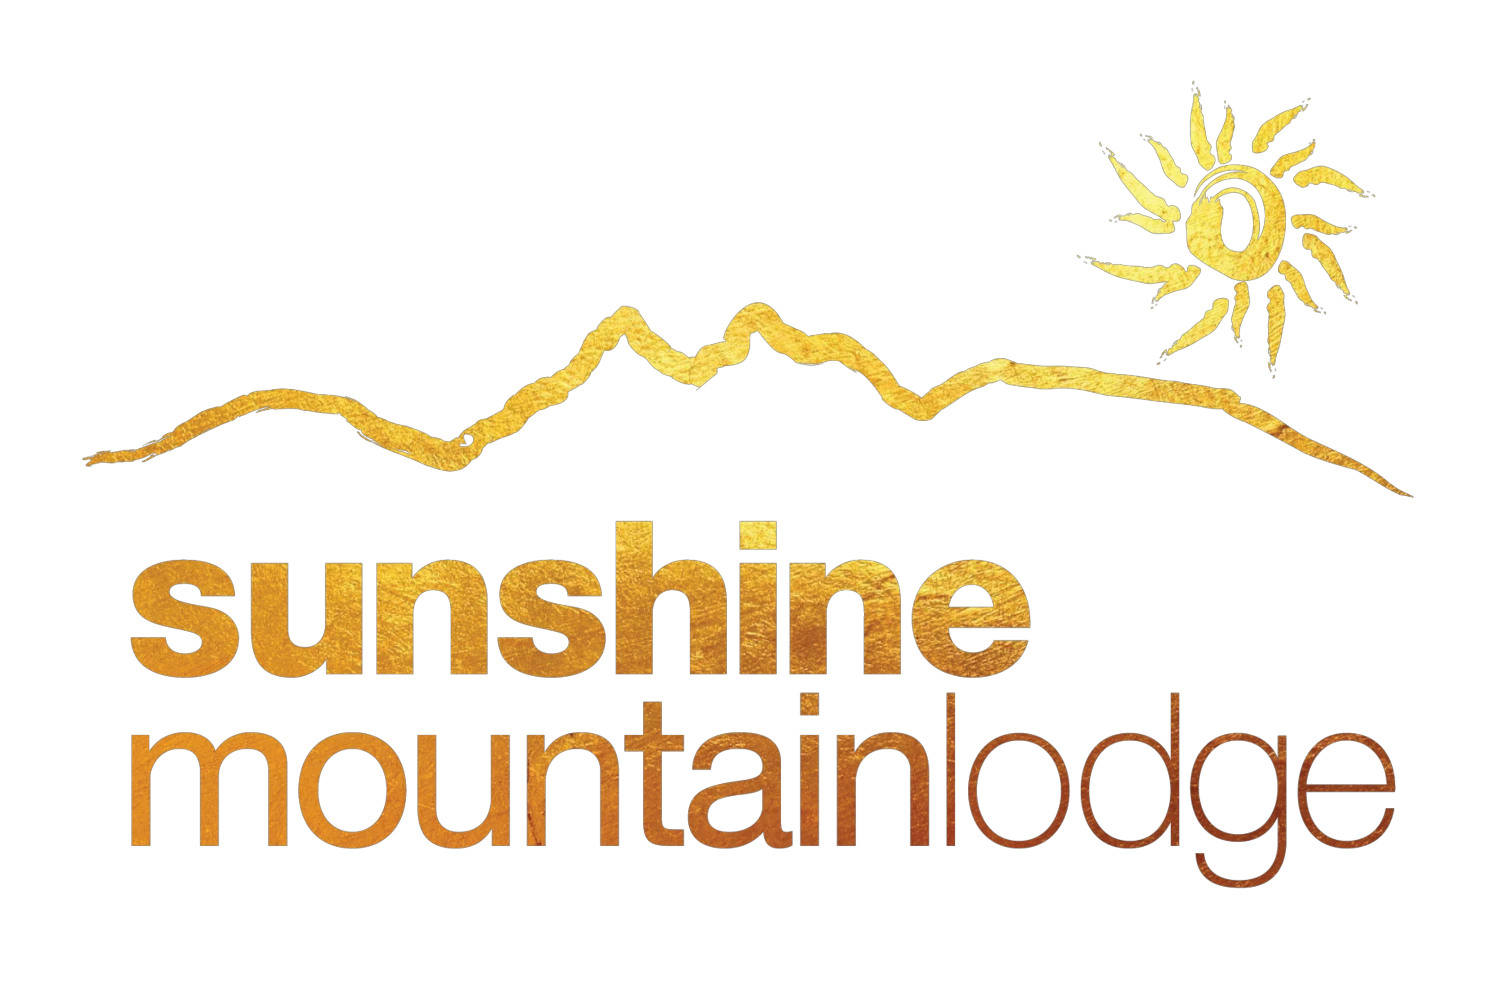 Limited Time Only Don't Miss Out On Sunshine Mountain Lodge Incredible Deals